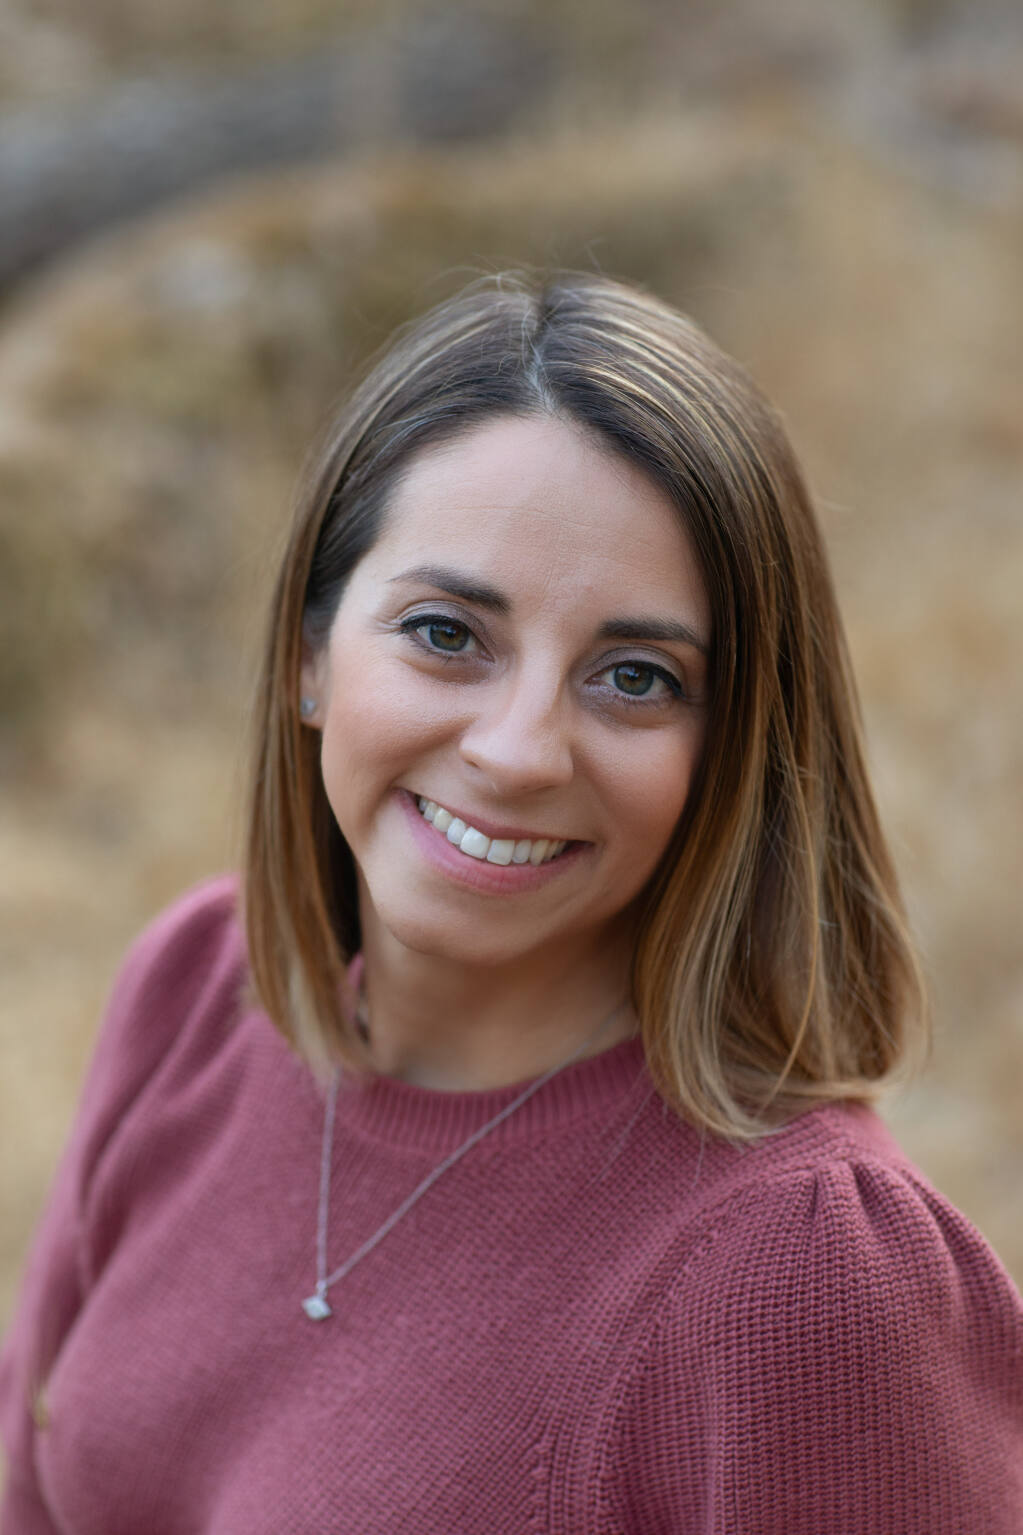 Kelly Obremski, 39, a compensation and benefits manager for Exchange Bank in Santa Rosa, is a 2023 North Bay Business Journal Forty Under 40 Award winner. The winners will be recognized Tuesday, April 25 at an event from four to 6 p.m. at Saralee and Richards Barn at the Sonoma County Fairgrounds.